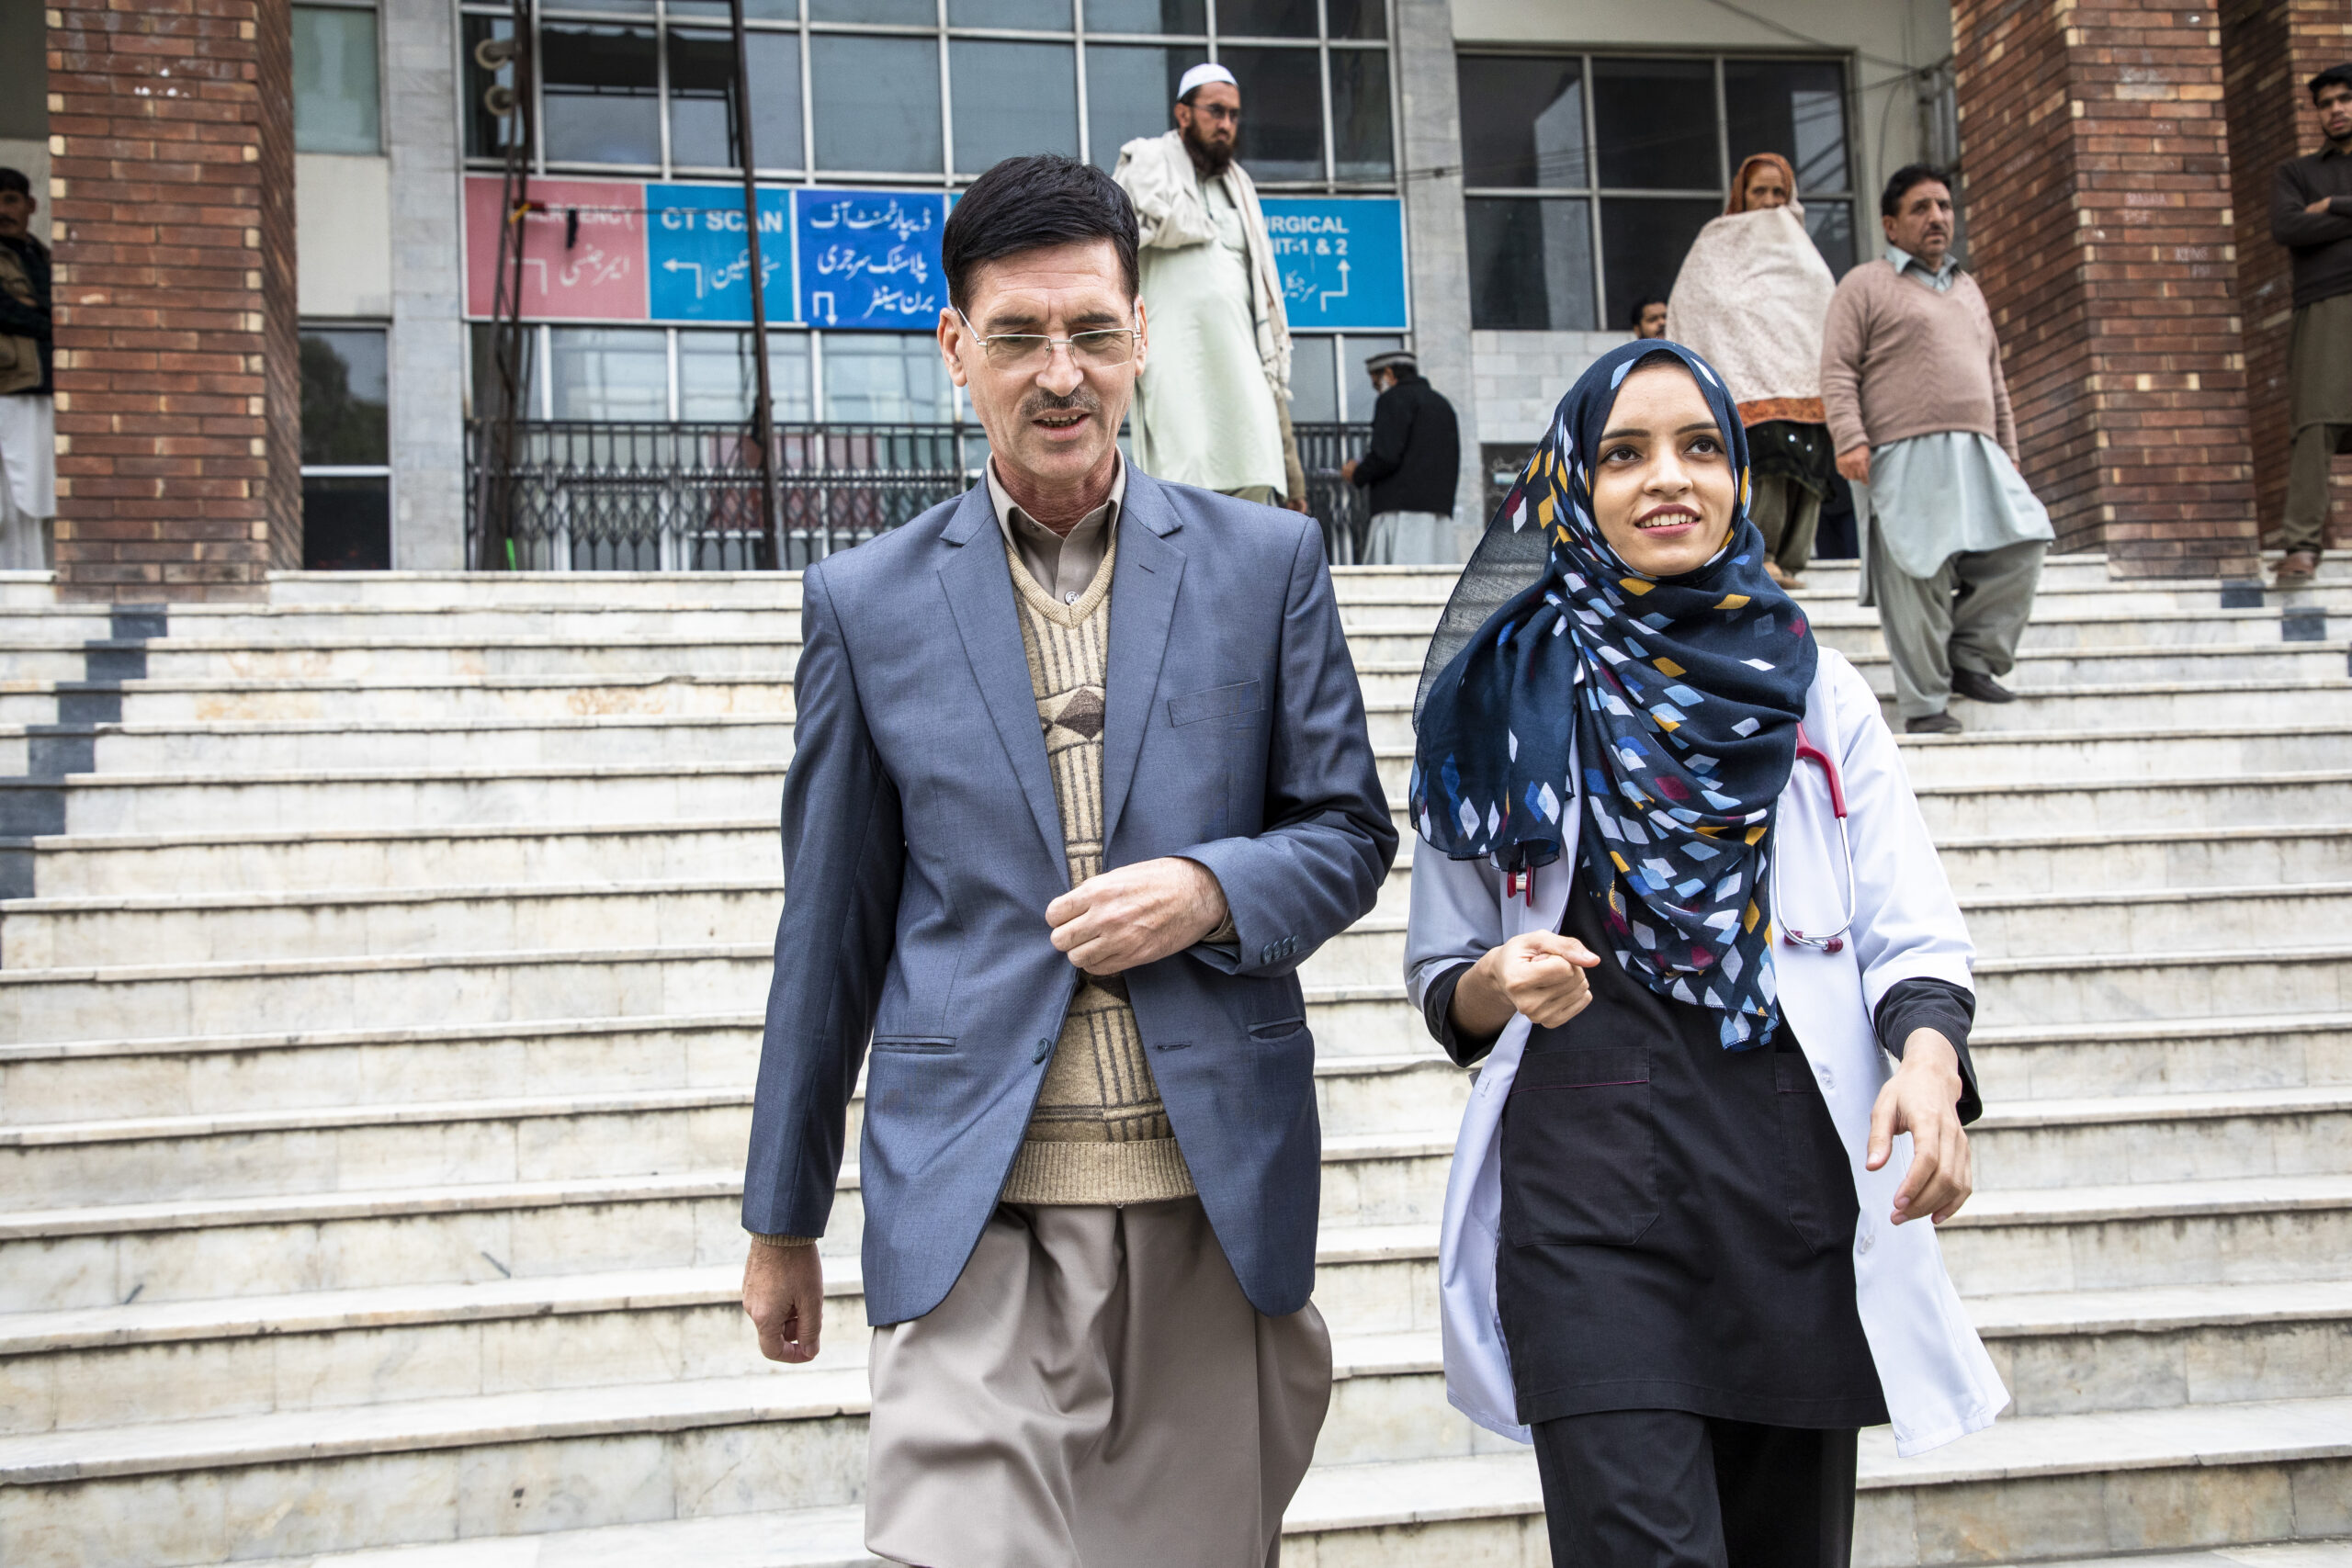 Saleema and her father Abdul Rehman, 49, at the Holy Family Hospital. “If there is a problem in my community they ask me because I have a daughter who is a doctor. It’s a great sense of pride for us,” says Abdul. © UNHCR/Roger Arnold